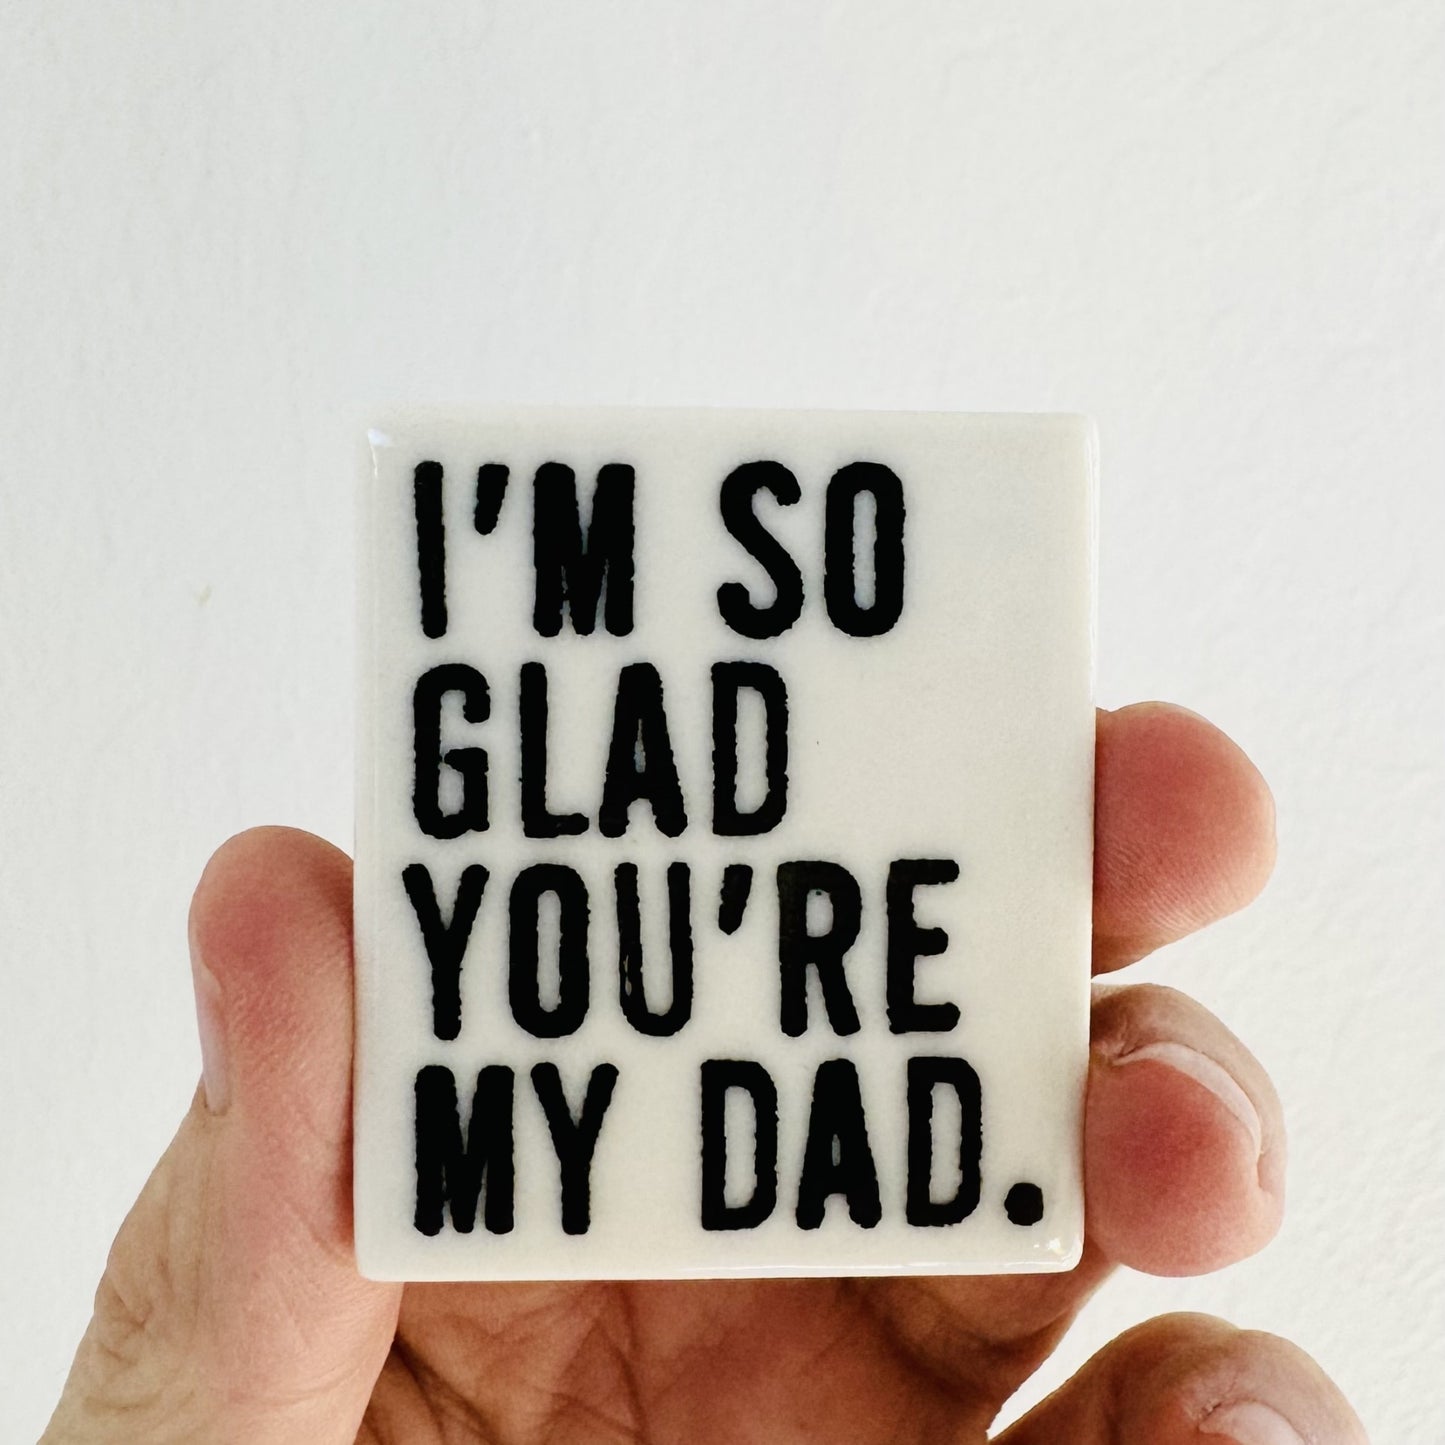 i'm so glad you're my dad quote ceramic magnet 1.5" w x 1.81" h